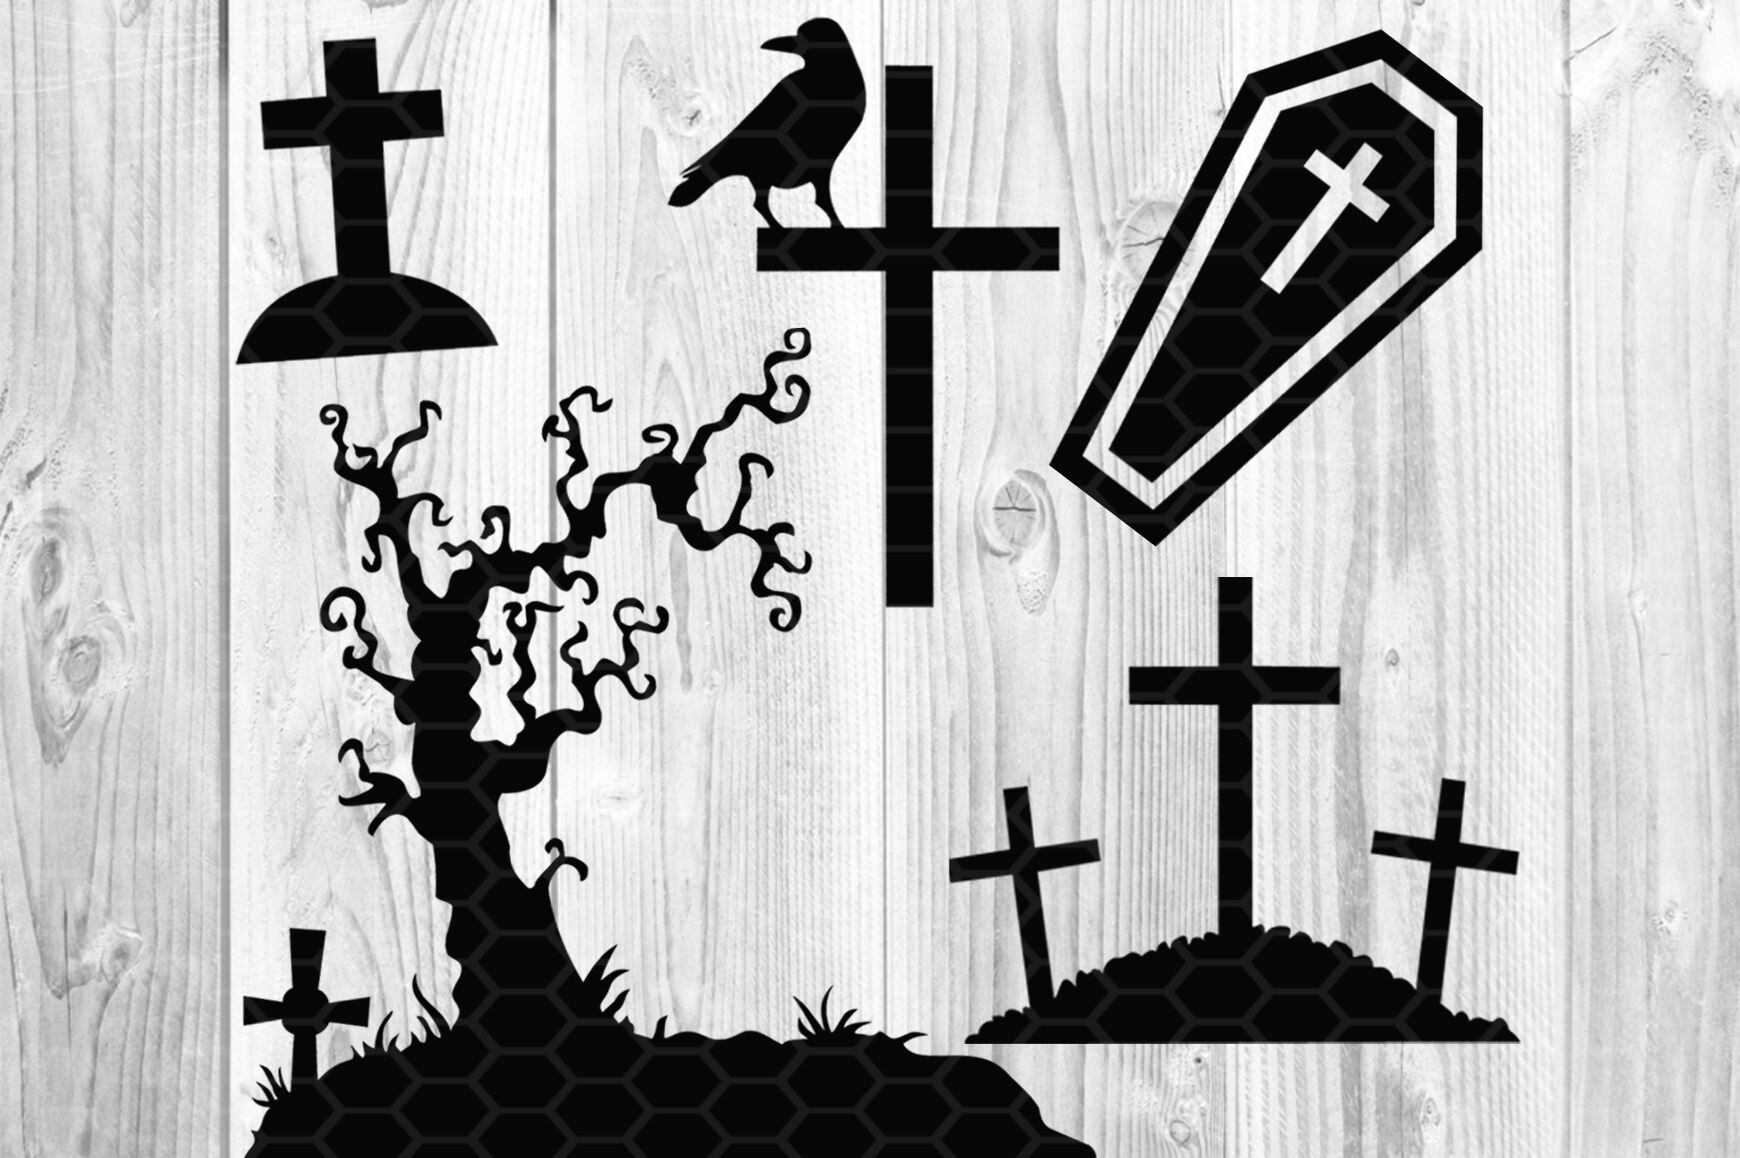 RIP Tombstone Halloween SVG Vector File and PNG Transparent -  Norway